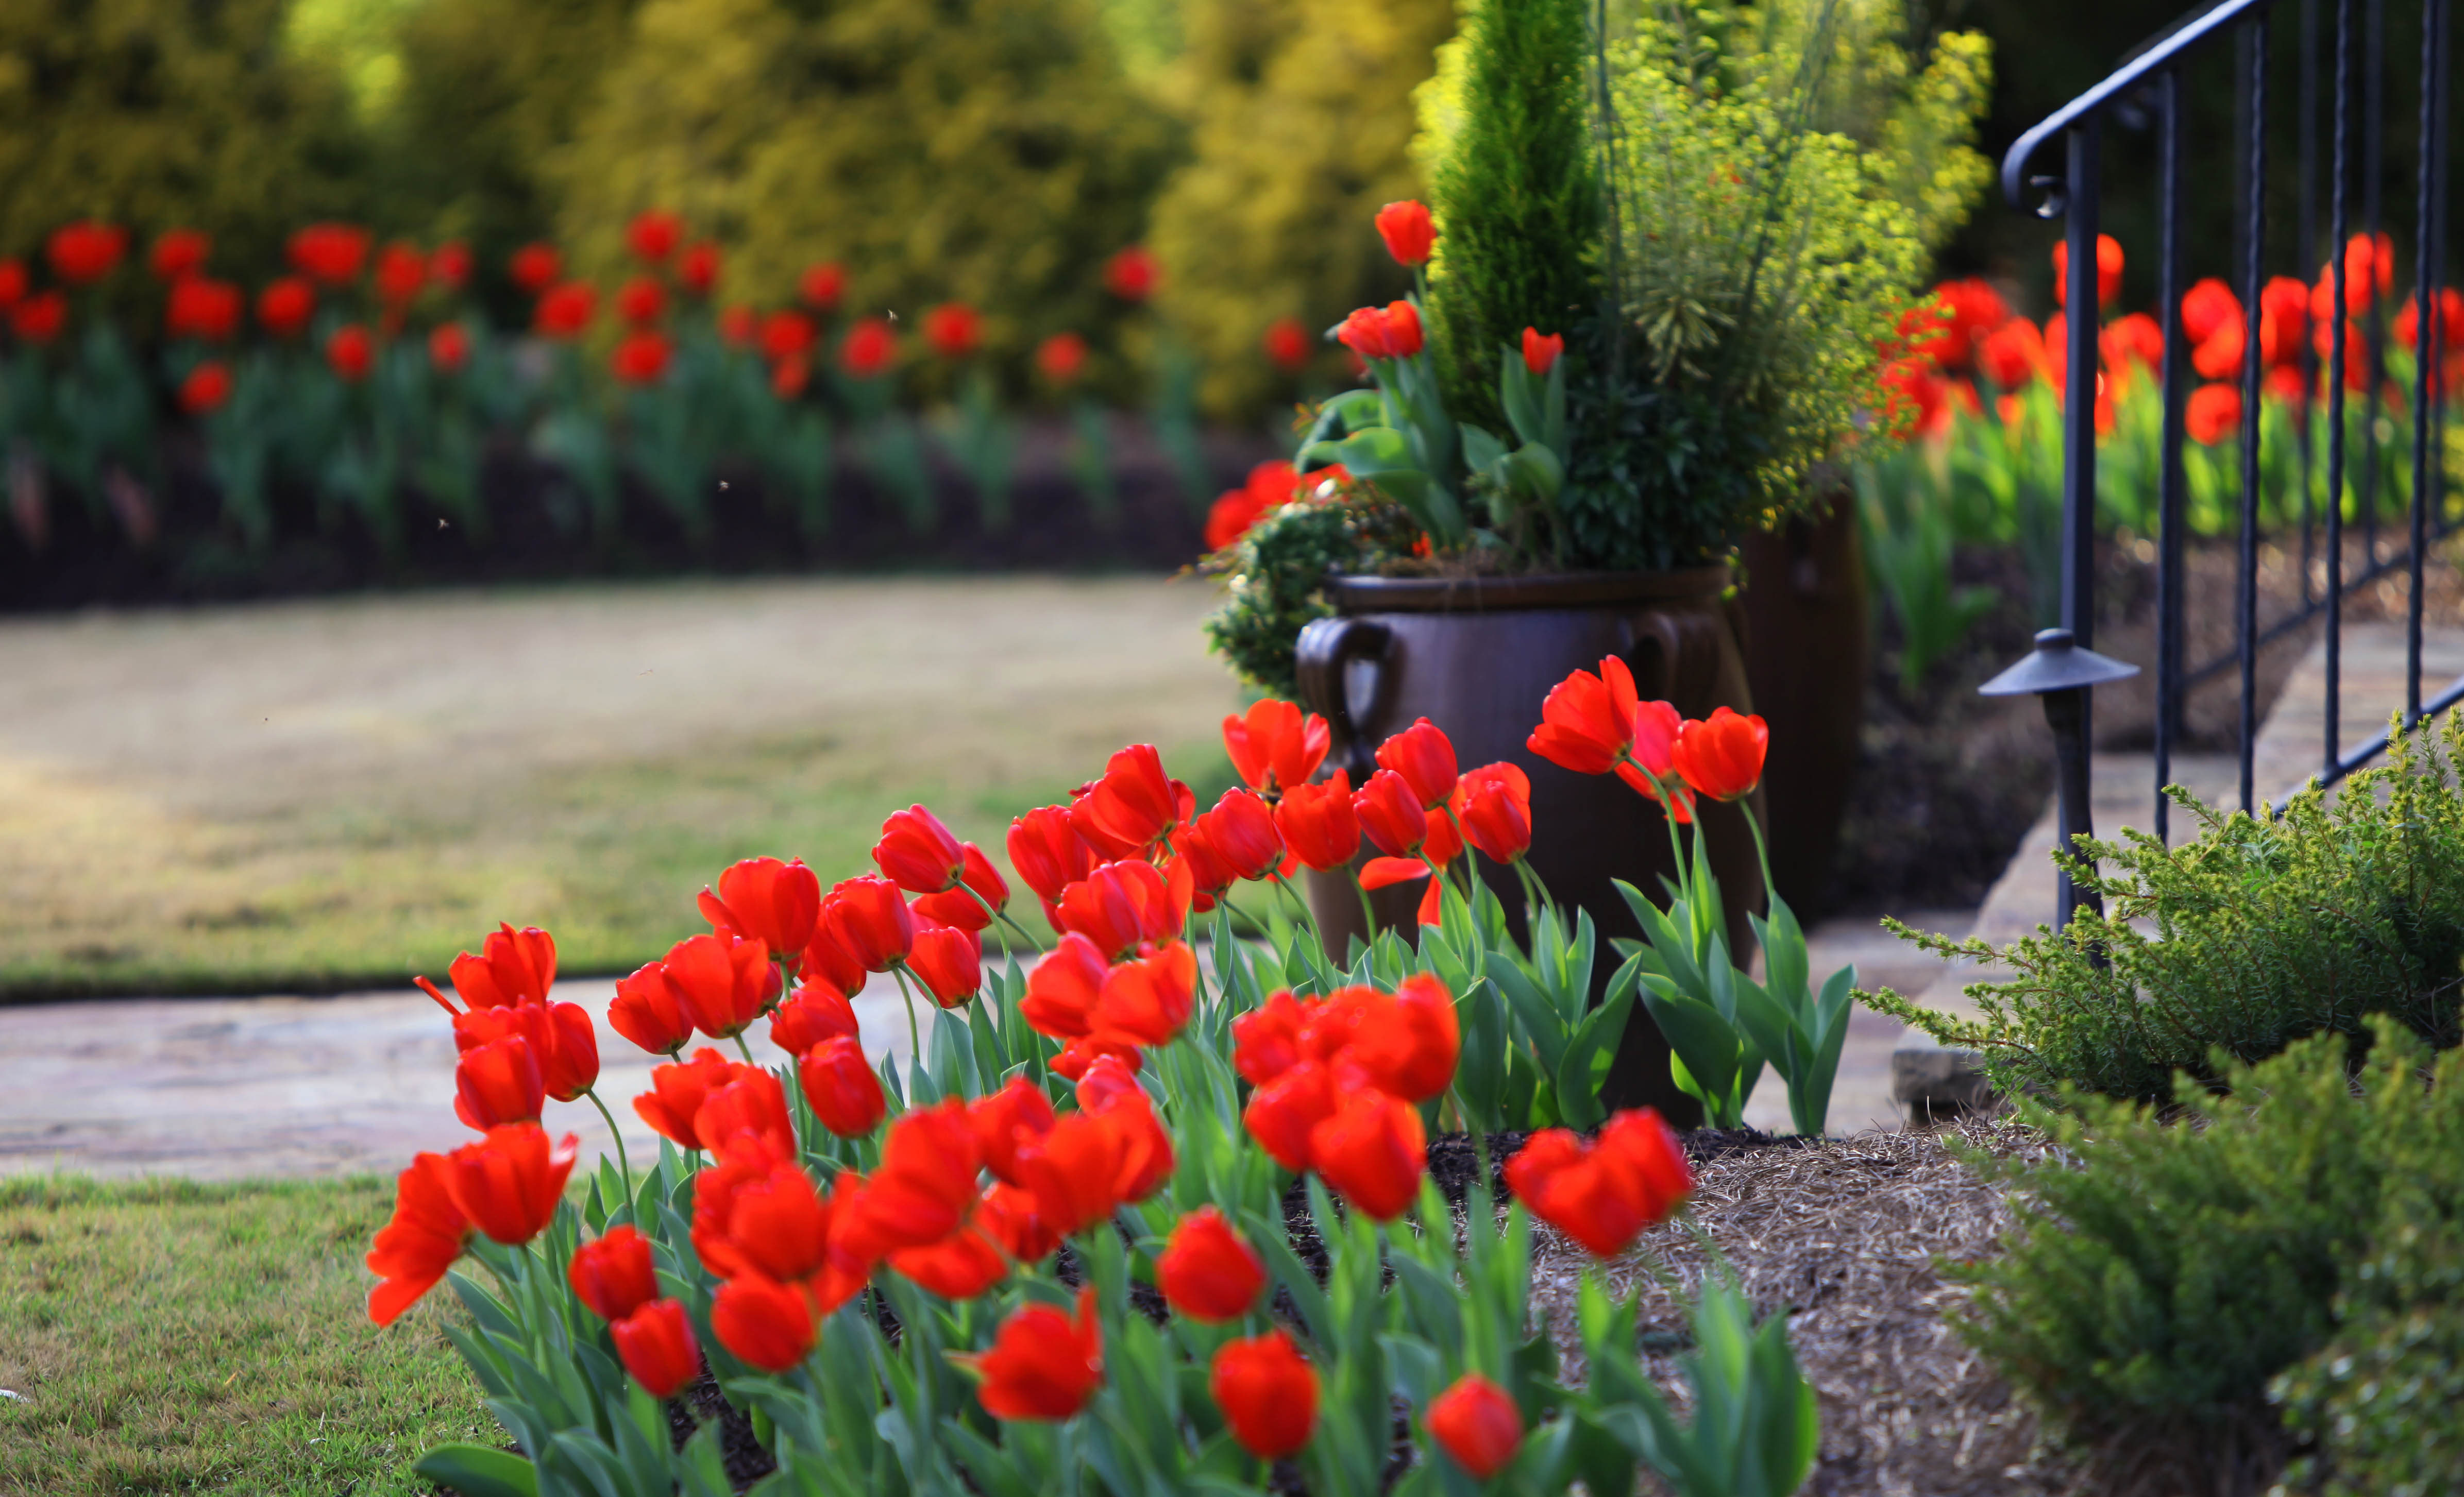 Front yard island beds with red tulips.